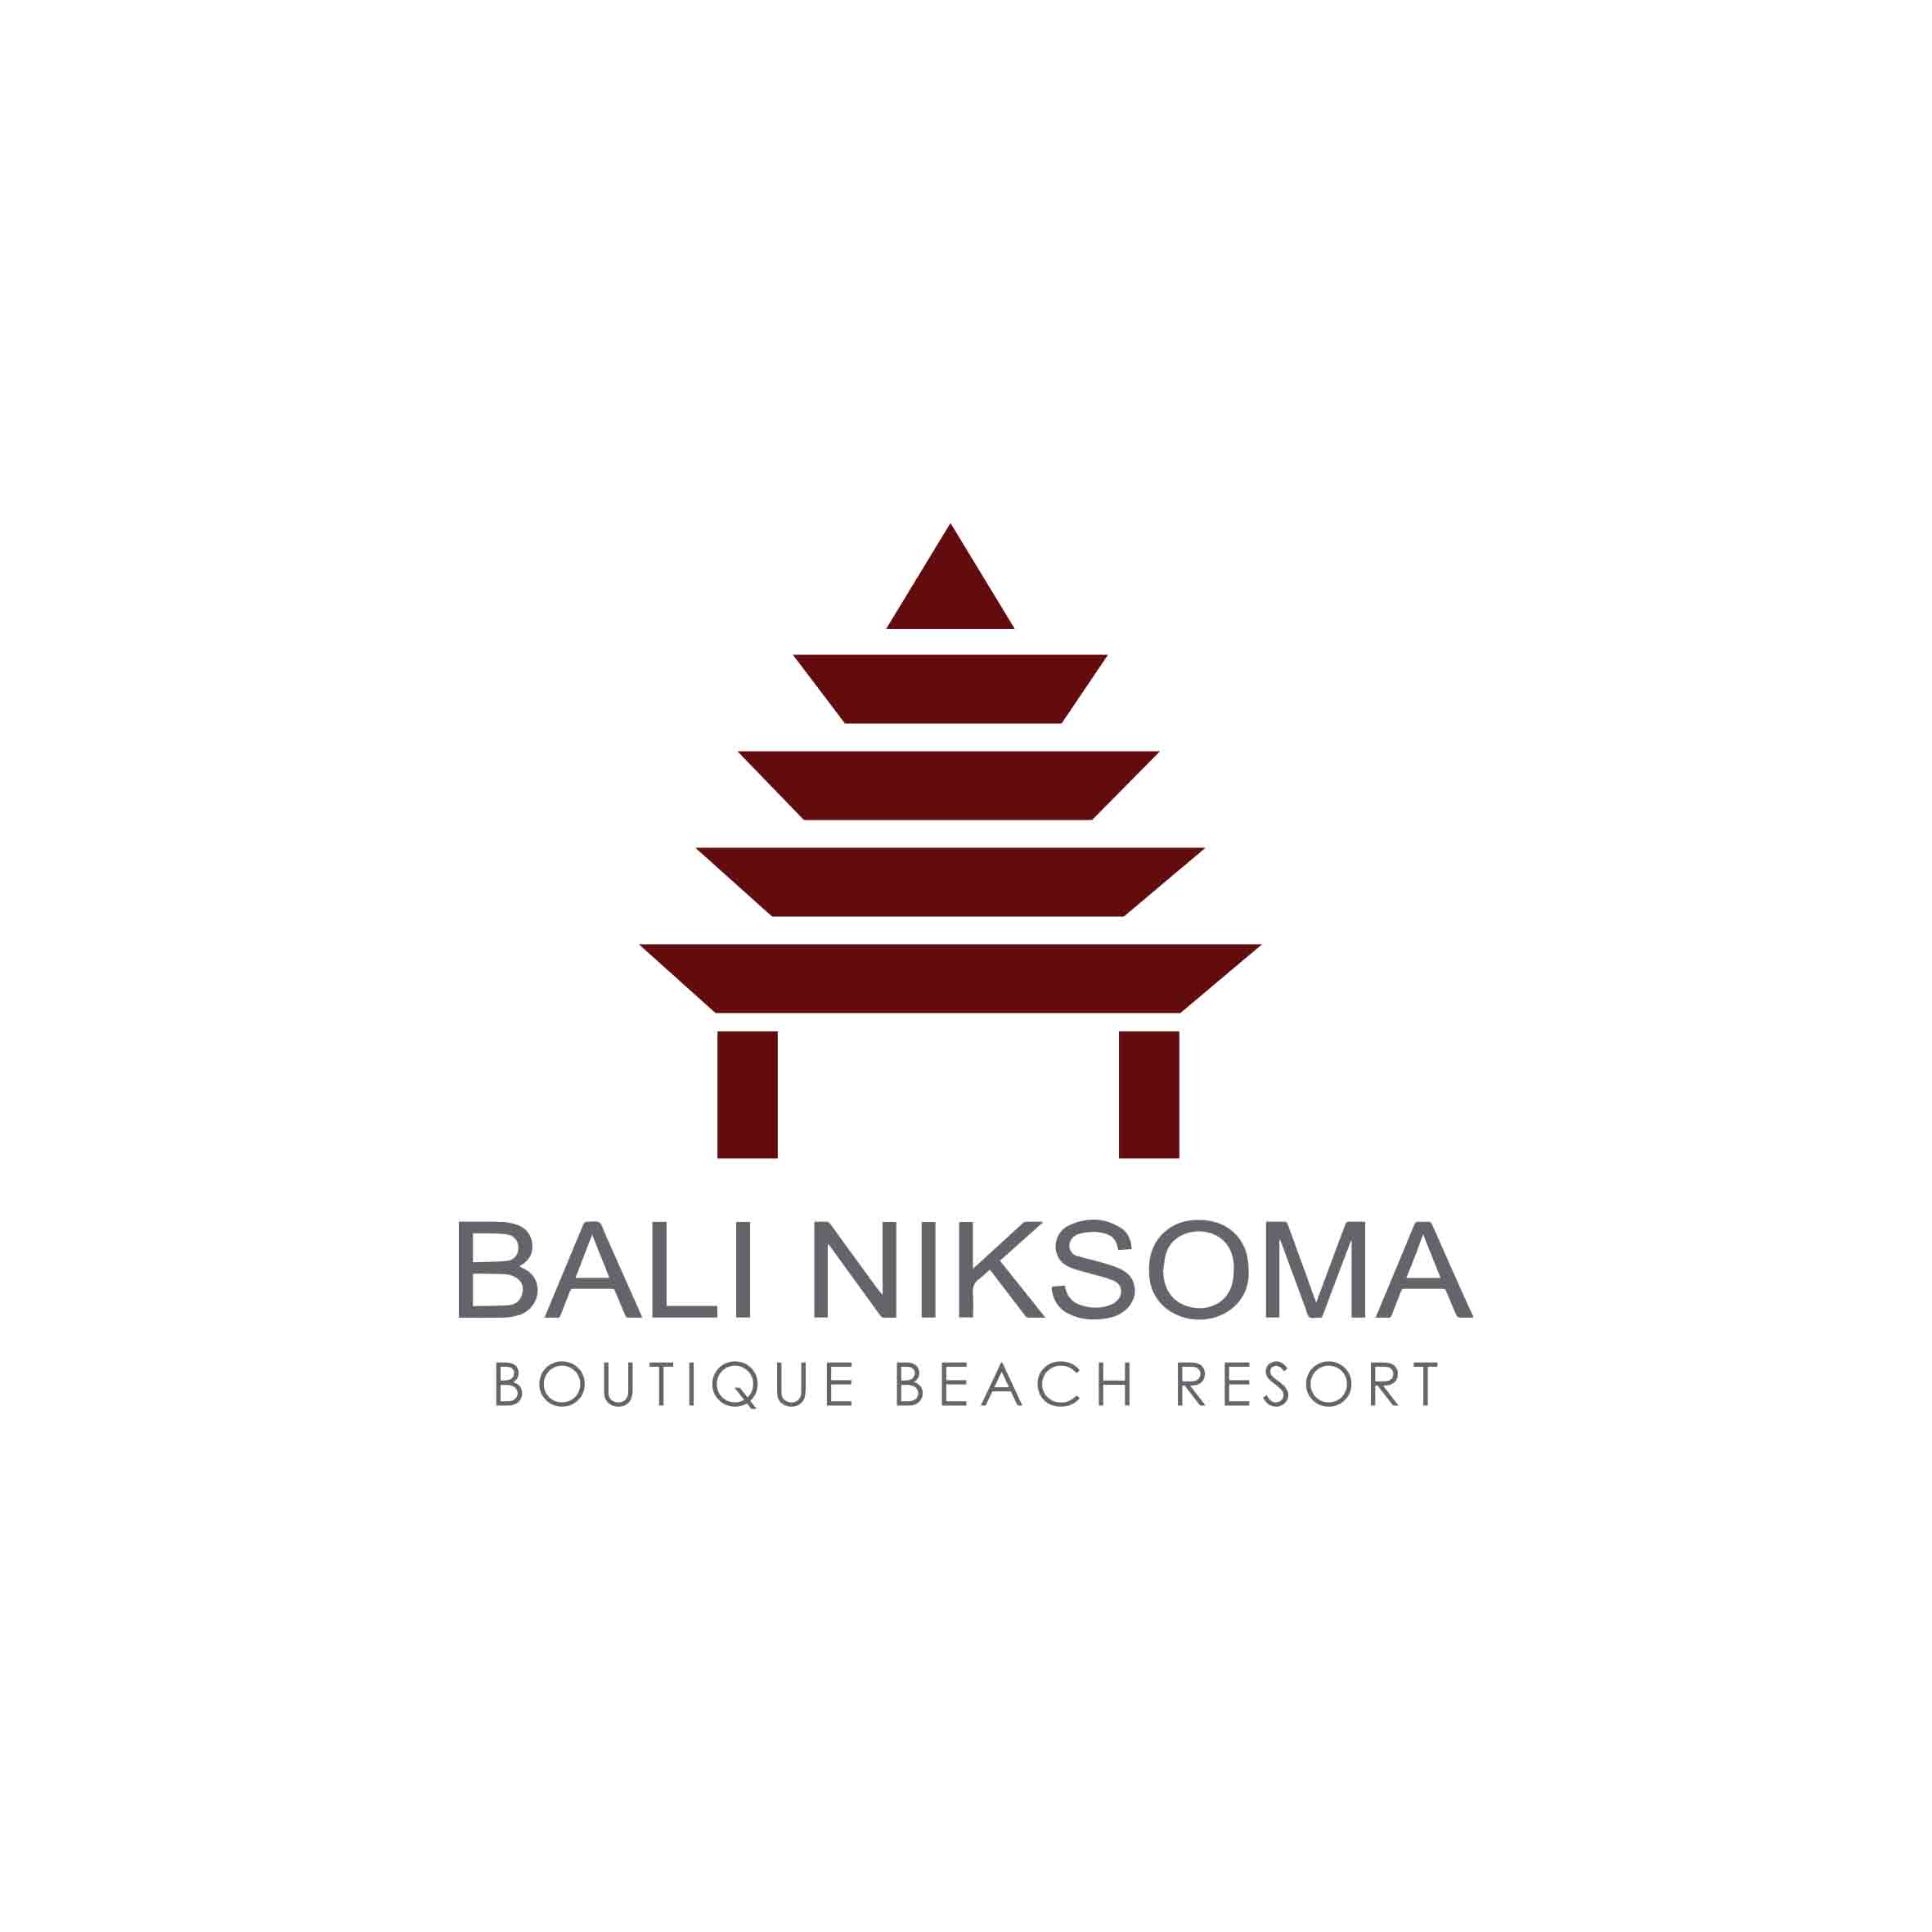 Save Up To 50% Off At Bali Niksoma Boutique Beach Resort